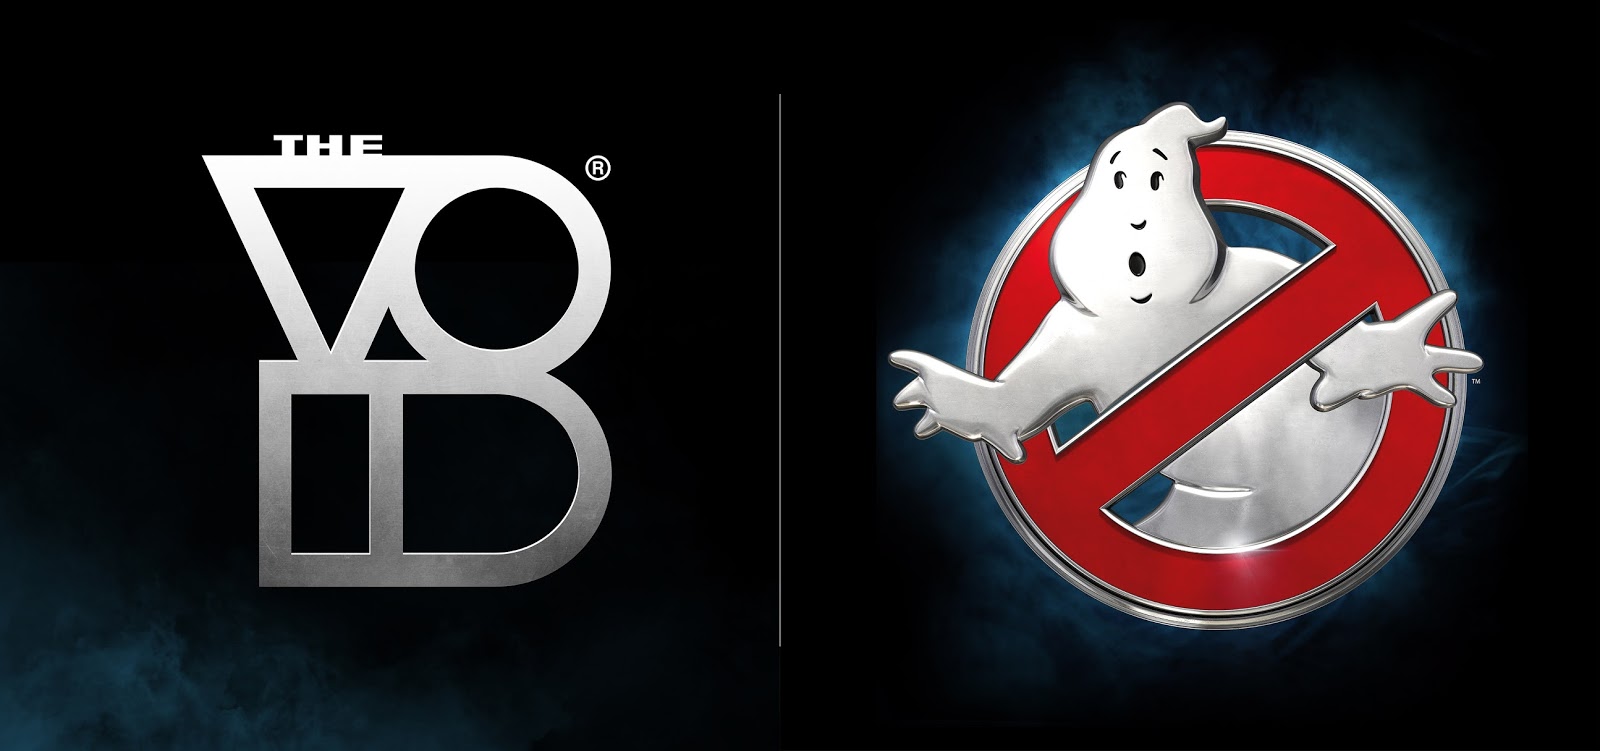 ghostbusters-dimension-the-void-2016-virtual-reality-vr-logos